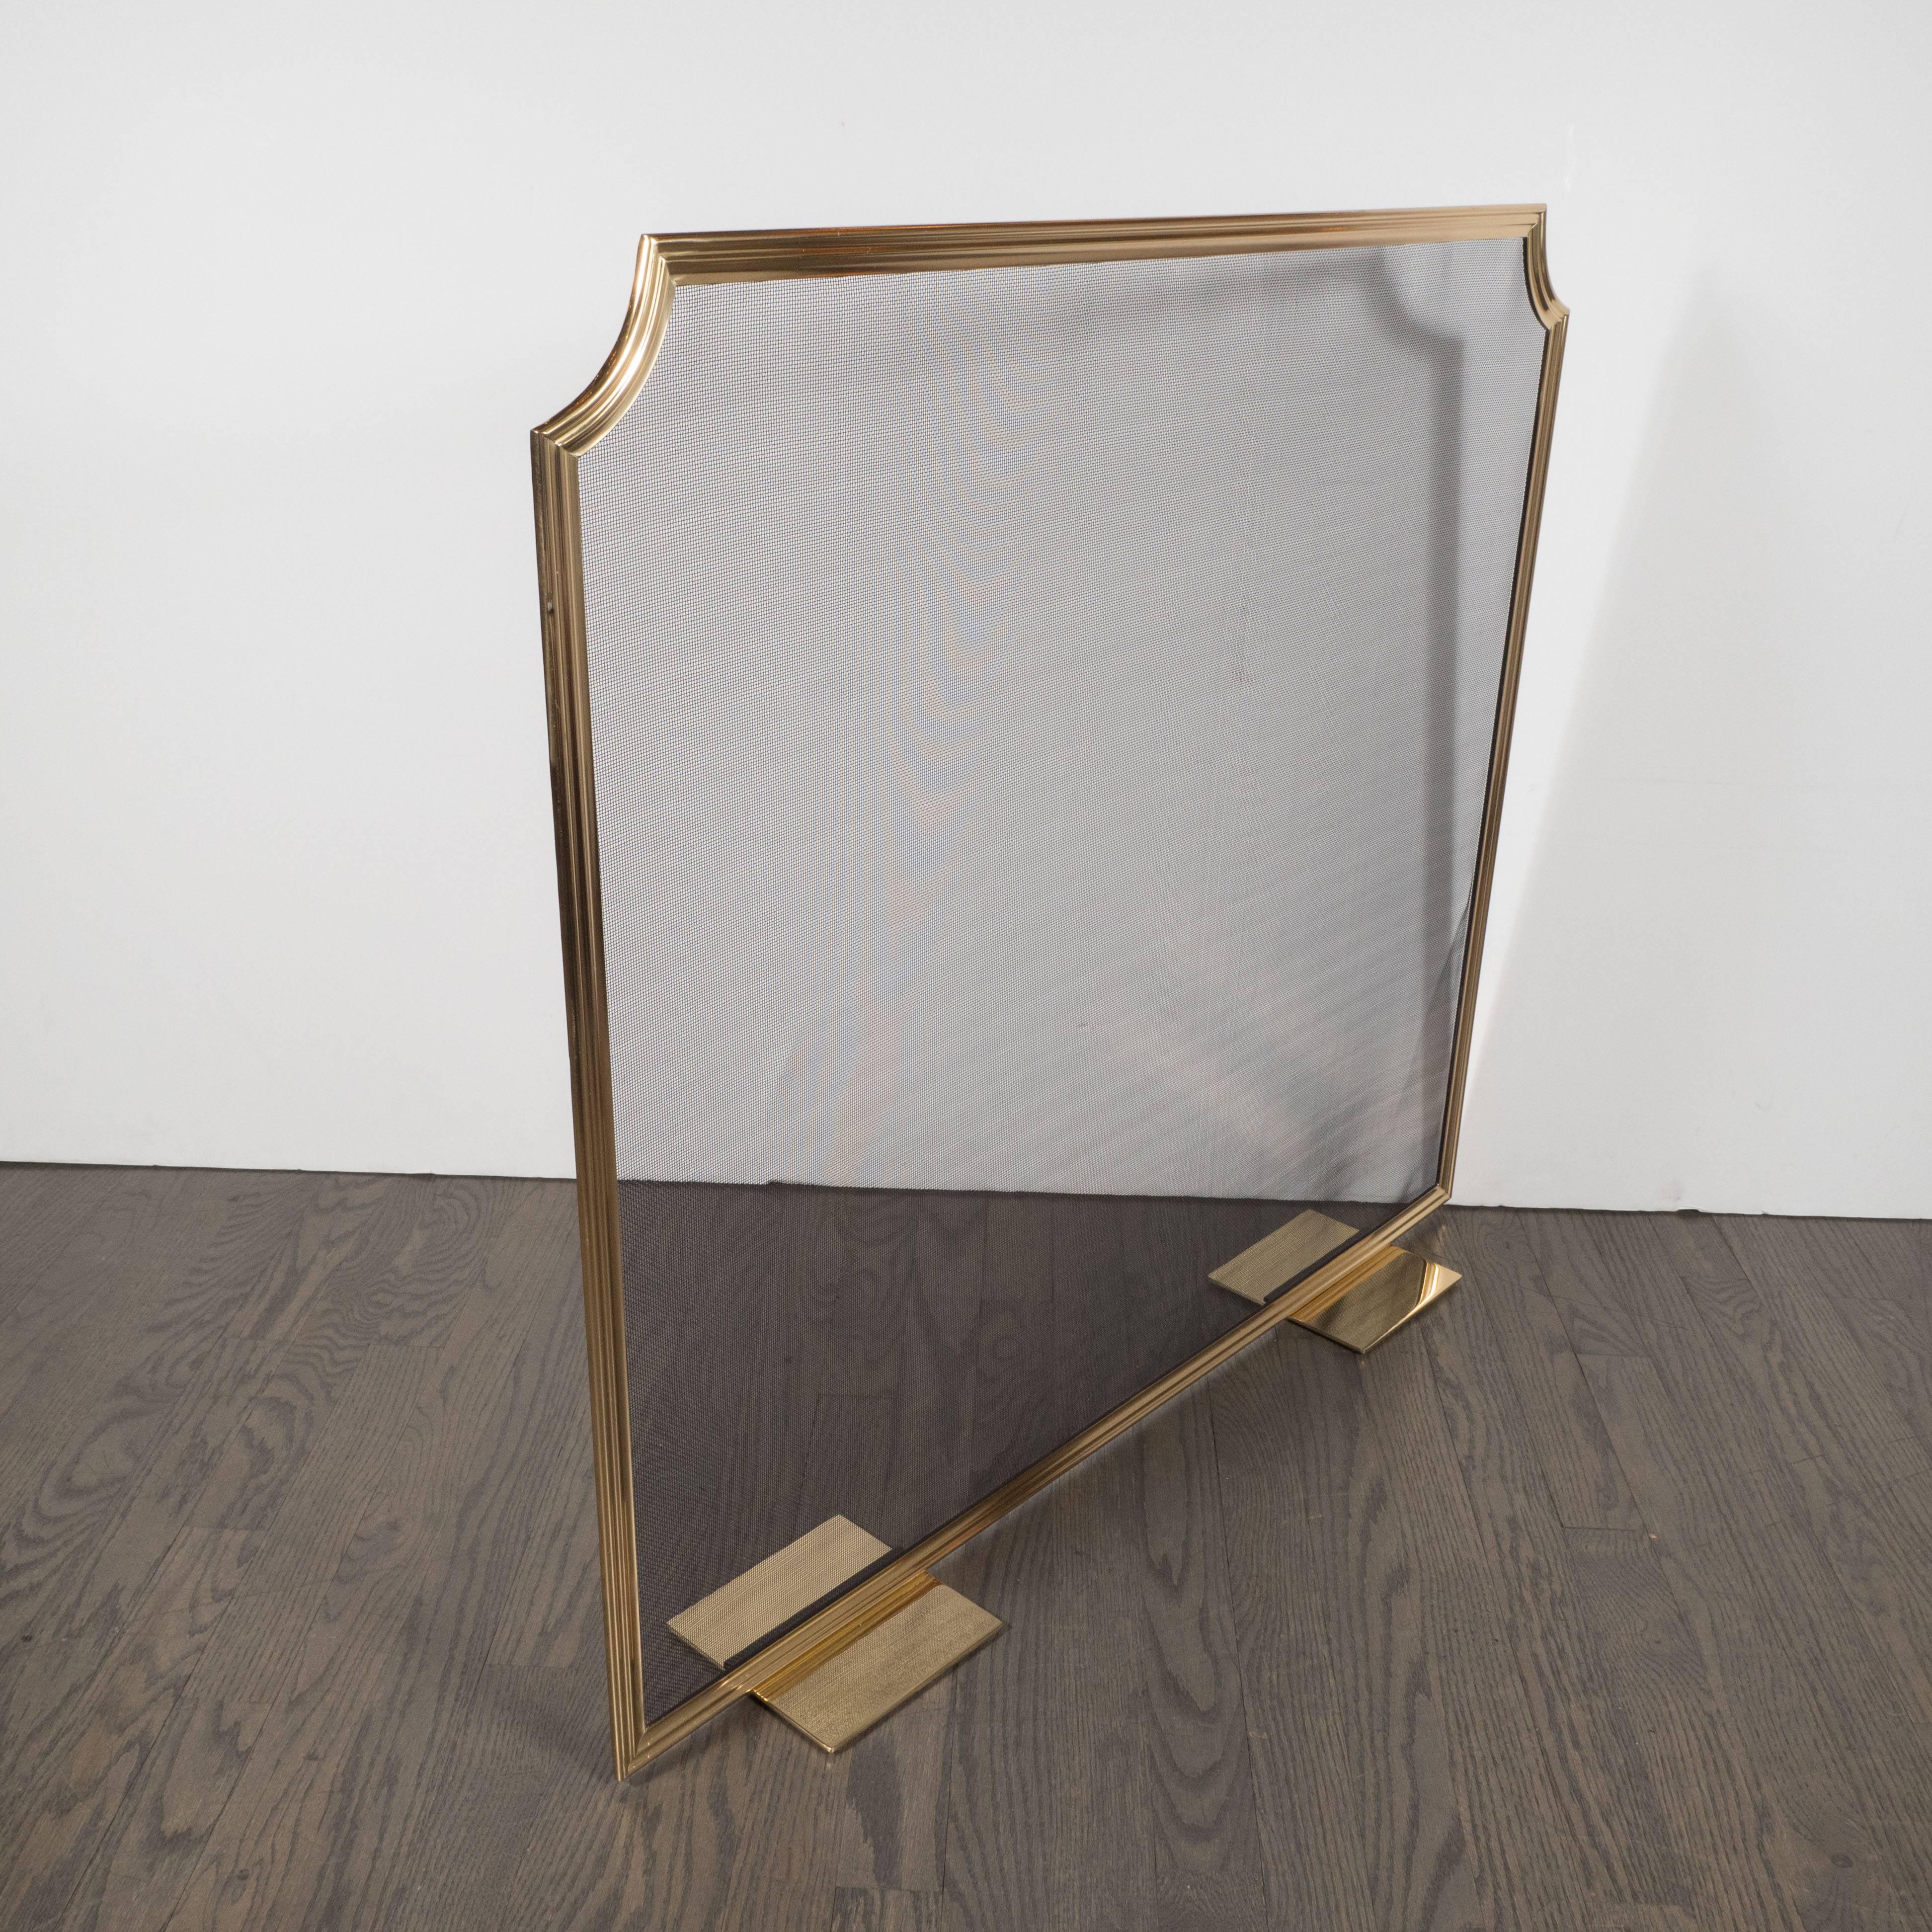 This elegant firescreen was custom realized by artisans in New York state, exclusively for us. It features a reeded brass perimeter with scalloped corners, fine square steel mesh, and flat square brass feet. With its austere form and luxe materials,